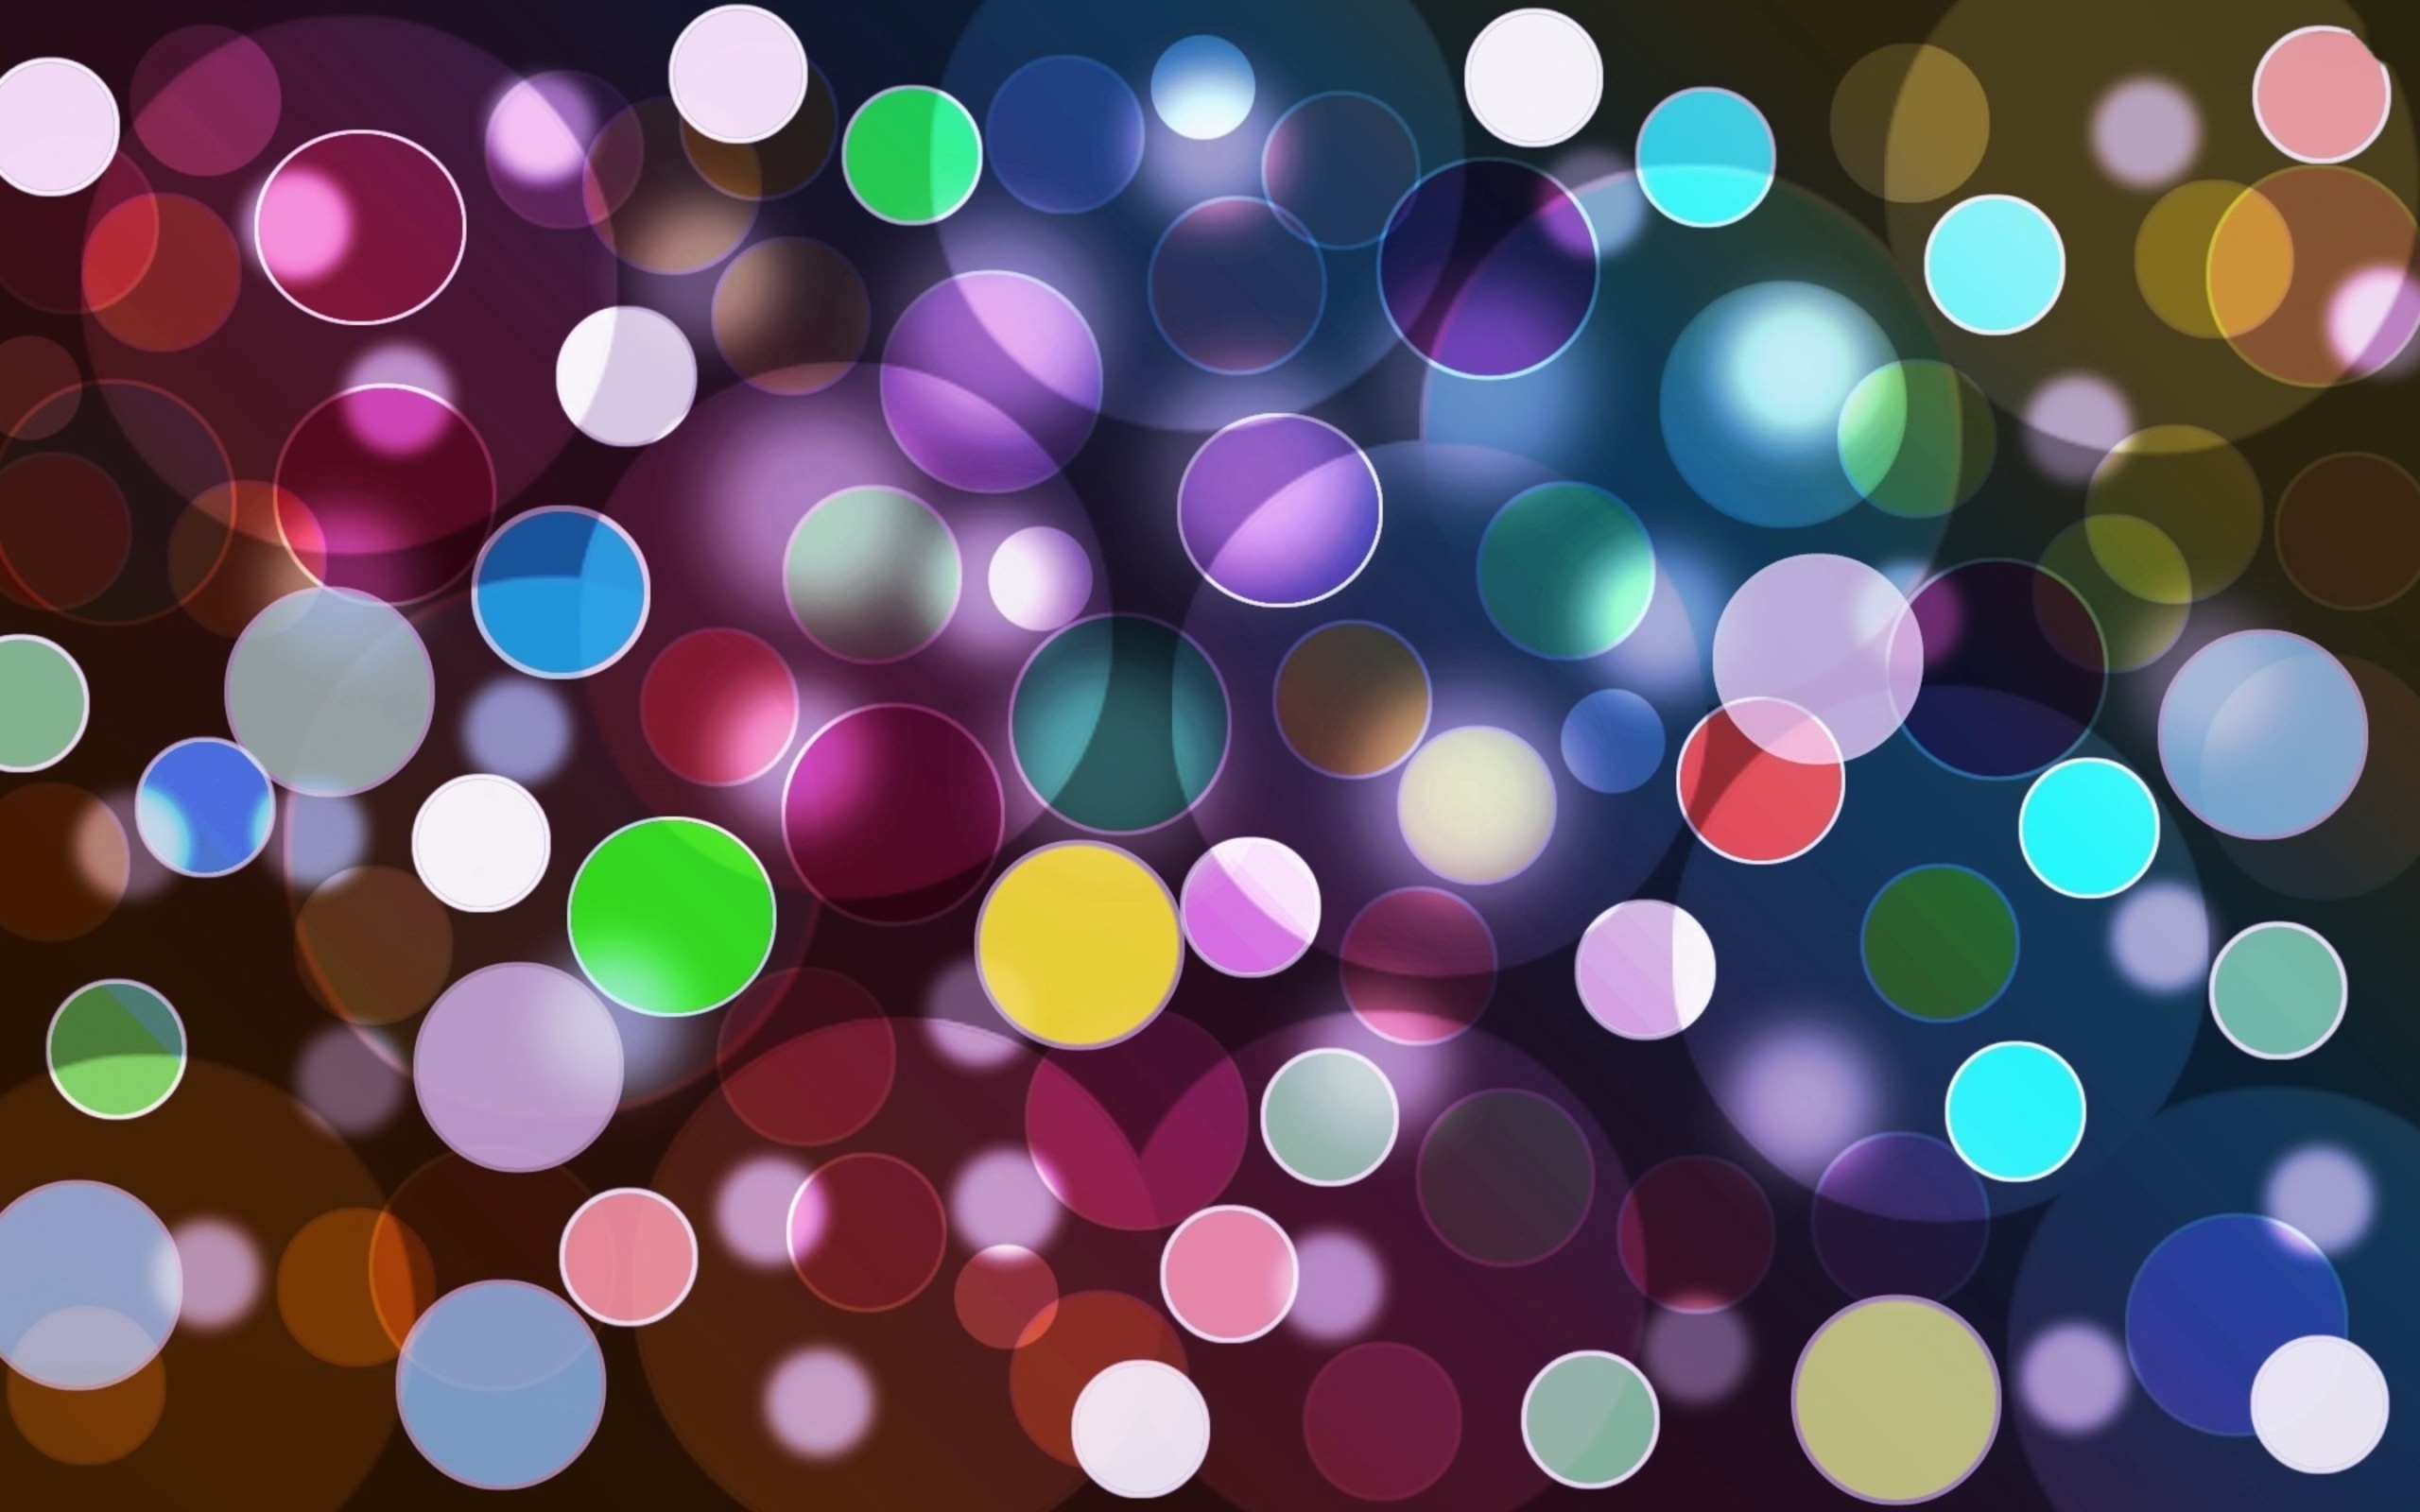 hd wallpapers, яркая абстракция, разноцветные круги, Bright abstraction, colorful circles